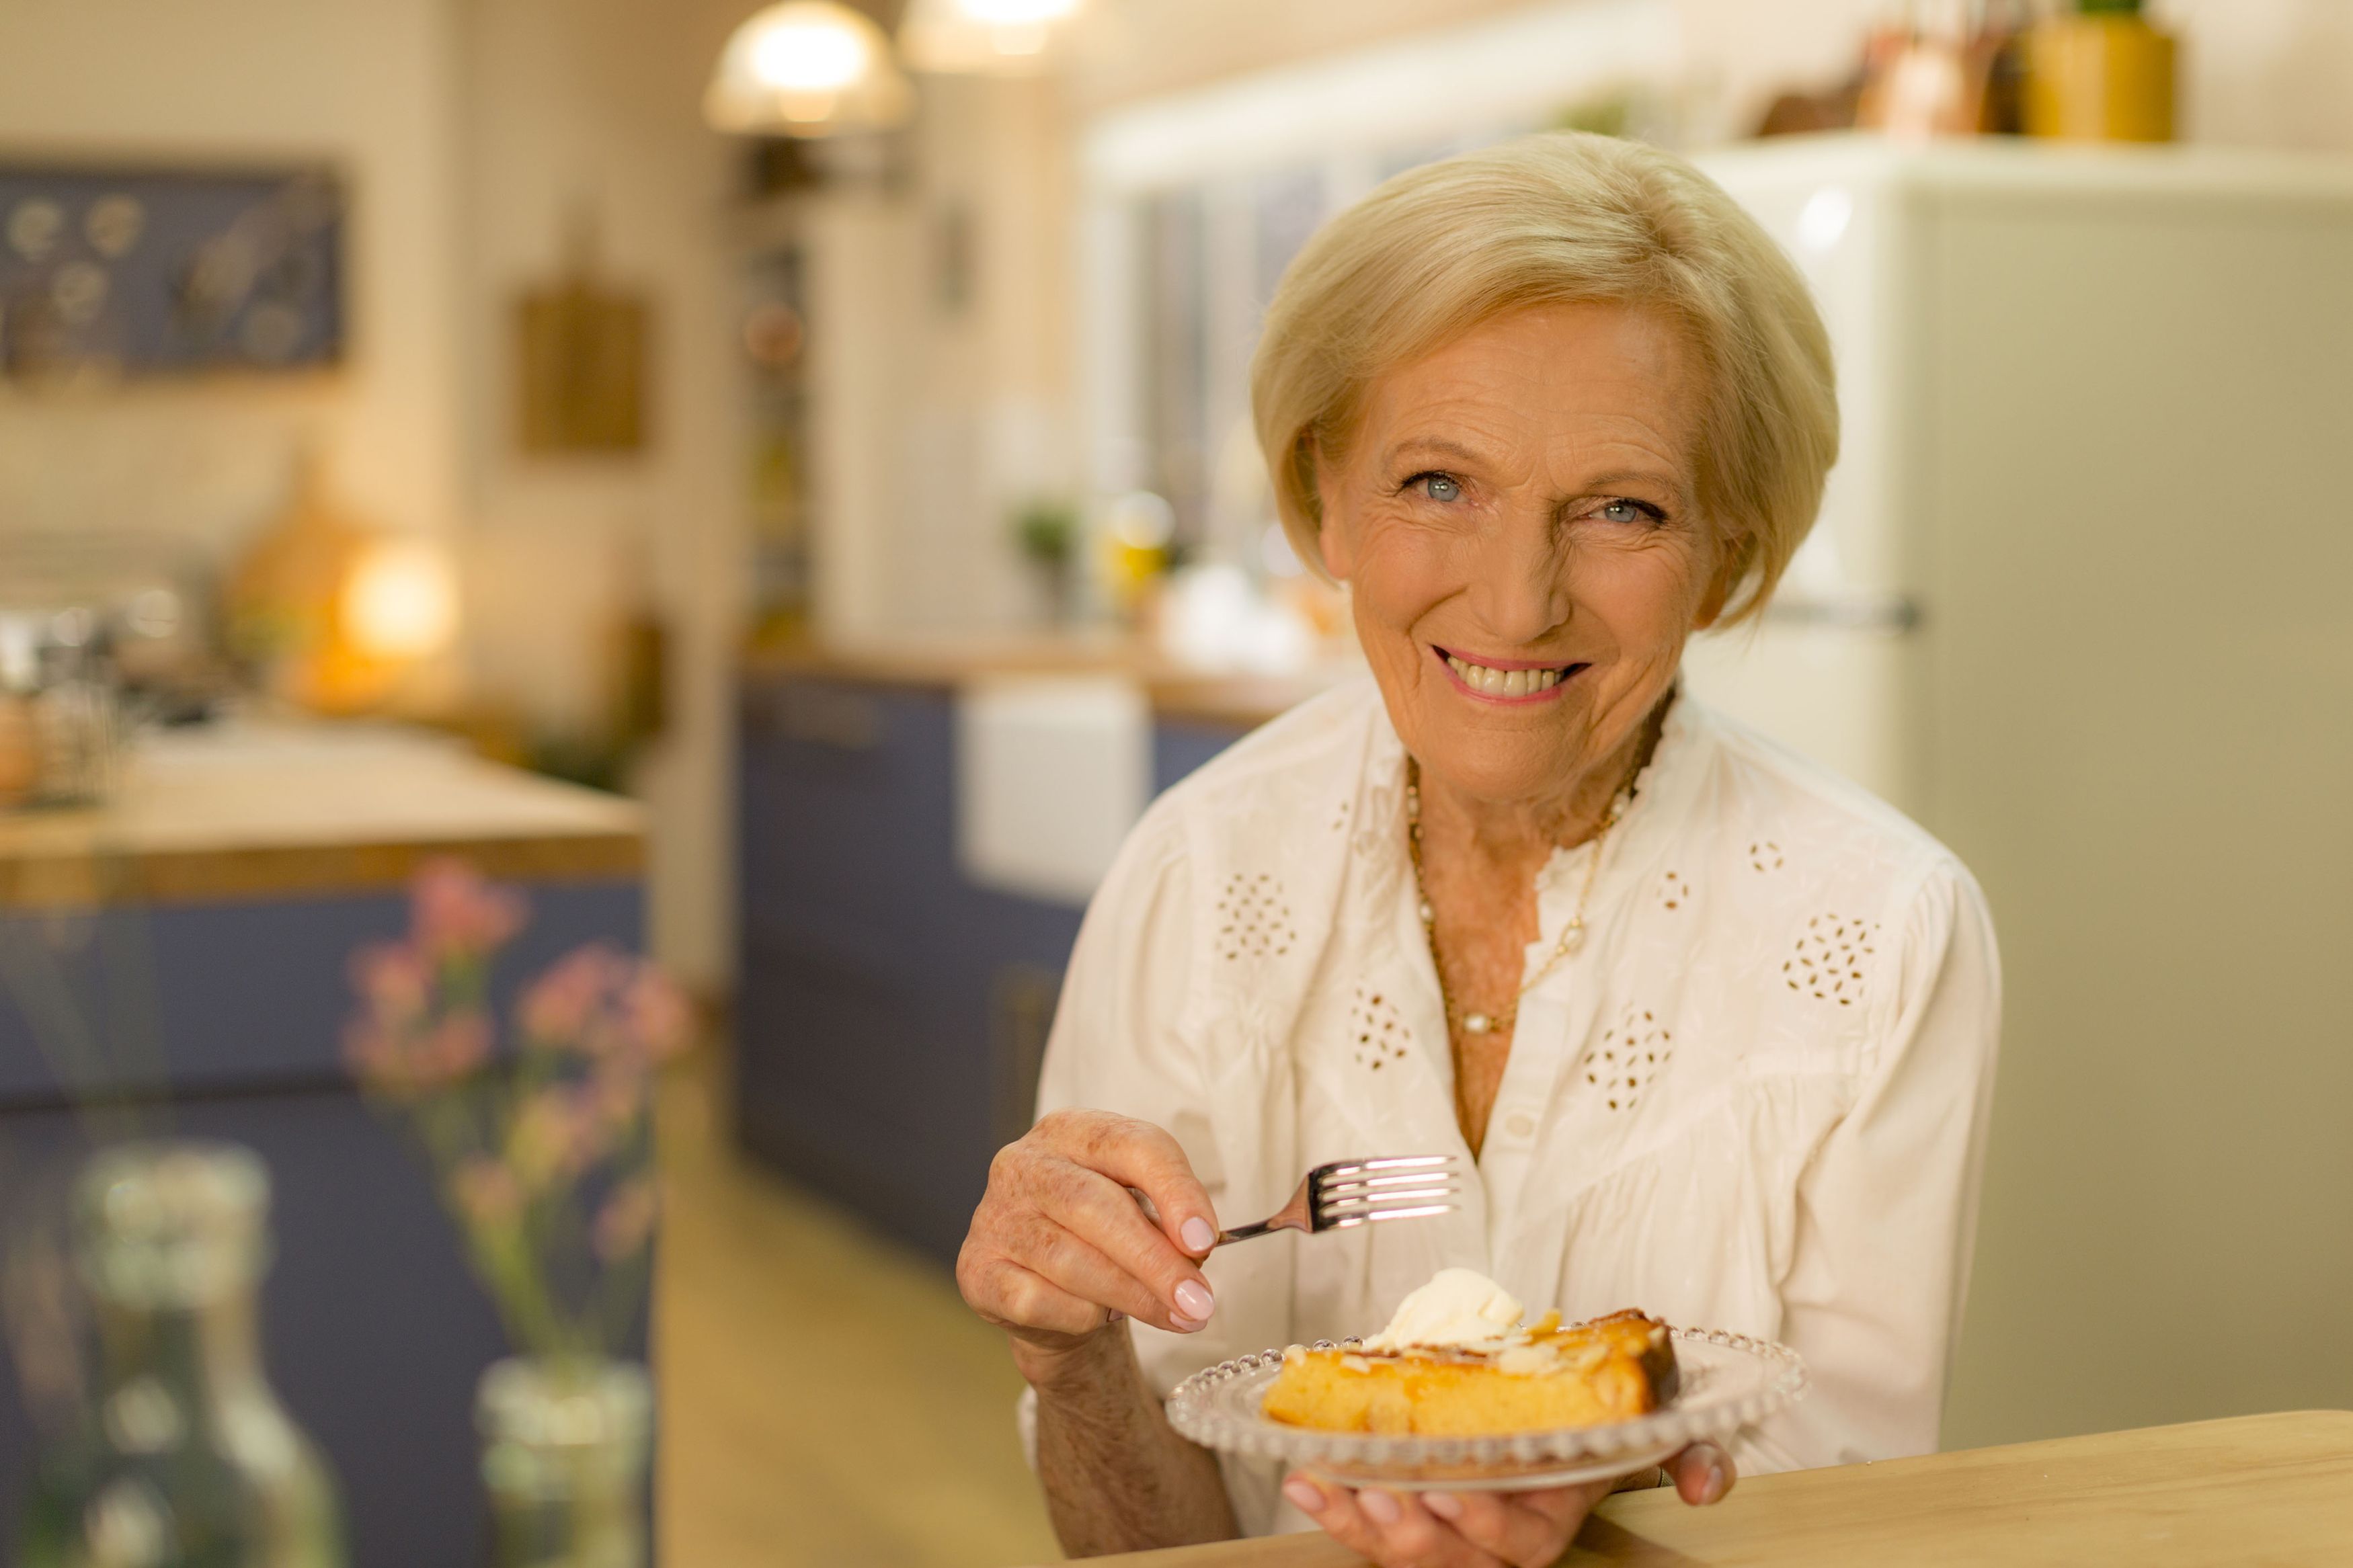 Undated BBC Handout Photo from Mary Berry’s Simple Comforts. Pictured: Mary Berry. PA Feature SHOWBIZ TV Quickfire Mary Berry. Picture credit should read: PA Photo/BBC/Endemol Shine UK/Bethany Medcalf. WARNING: This picture must only be used to accompany PA Feature SHOWBIZ TV Quickfire Mary Berry. WARNING: Use of this copyright image is subject to the terms of use of BBC Pictures' BBC Digital Picture Service. In particular, this image may only be published in print for editorial use during the publicity period (the weeks immediately leading up to and including the transmission week of the relevant programme or event and three review weeks following) for the purpose of publicising the programme, person or service pictured and provided the BBC and the copyright holder in the caption are credited. Any use of this image on the internet and other online communication services will require a separate prior agreement with BBC Pictures. For any other purpose whatsoever, including advertising and commercial prior written approval from the copyright holder will be required. 